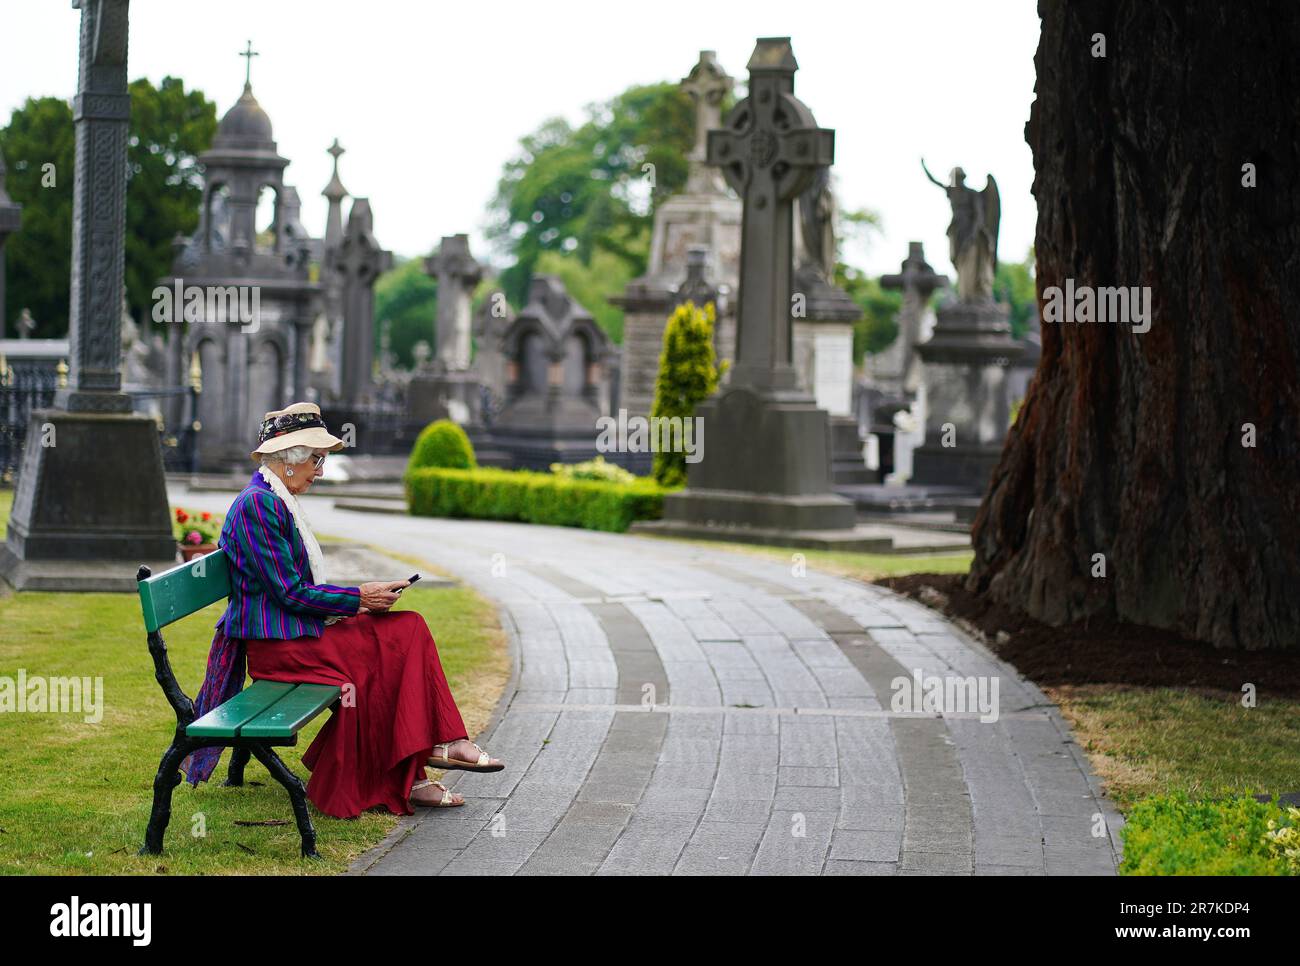 Kitty O'Shea, from Oxford, reads Ulysses on her kindle ahead of the 'Joycestagers' reenactment from the 'Hades' chapter of Ulysses at Glasnevin Cemetery, Dublin, as part of the annual Bloomsday celebrations. Bloomsday is a celebration of the life of Irish writer James Joyce, observed annually worldwide on June 16, the day his 1922 novel Ulysses takes place in 1904, the date of his first outing with his wife-to-be Nora Barnacle. The day is named after its protagonist Leopold Bloom. Picture date: Friday June 16, 2023. Stock Photo